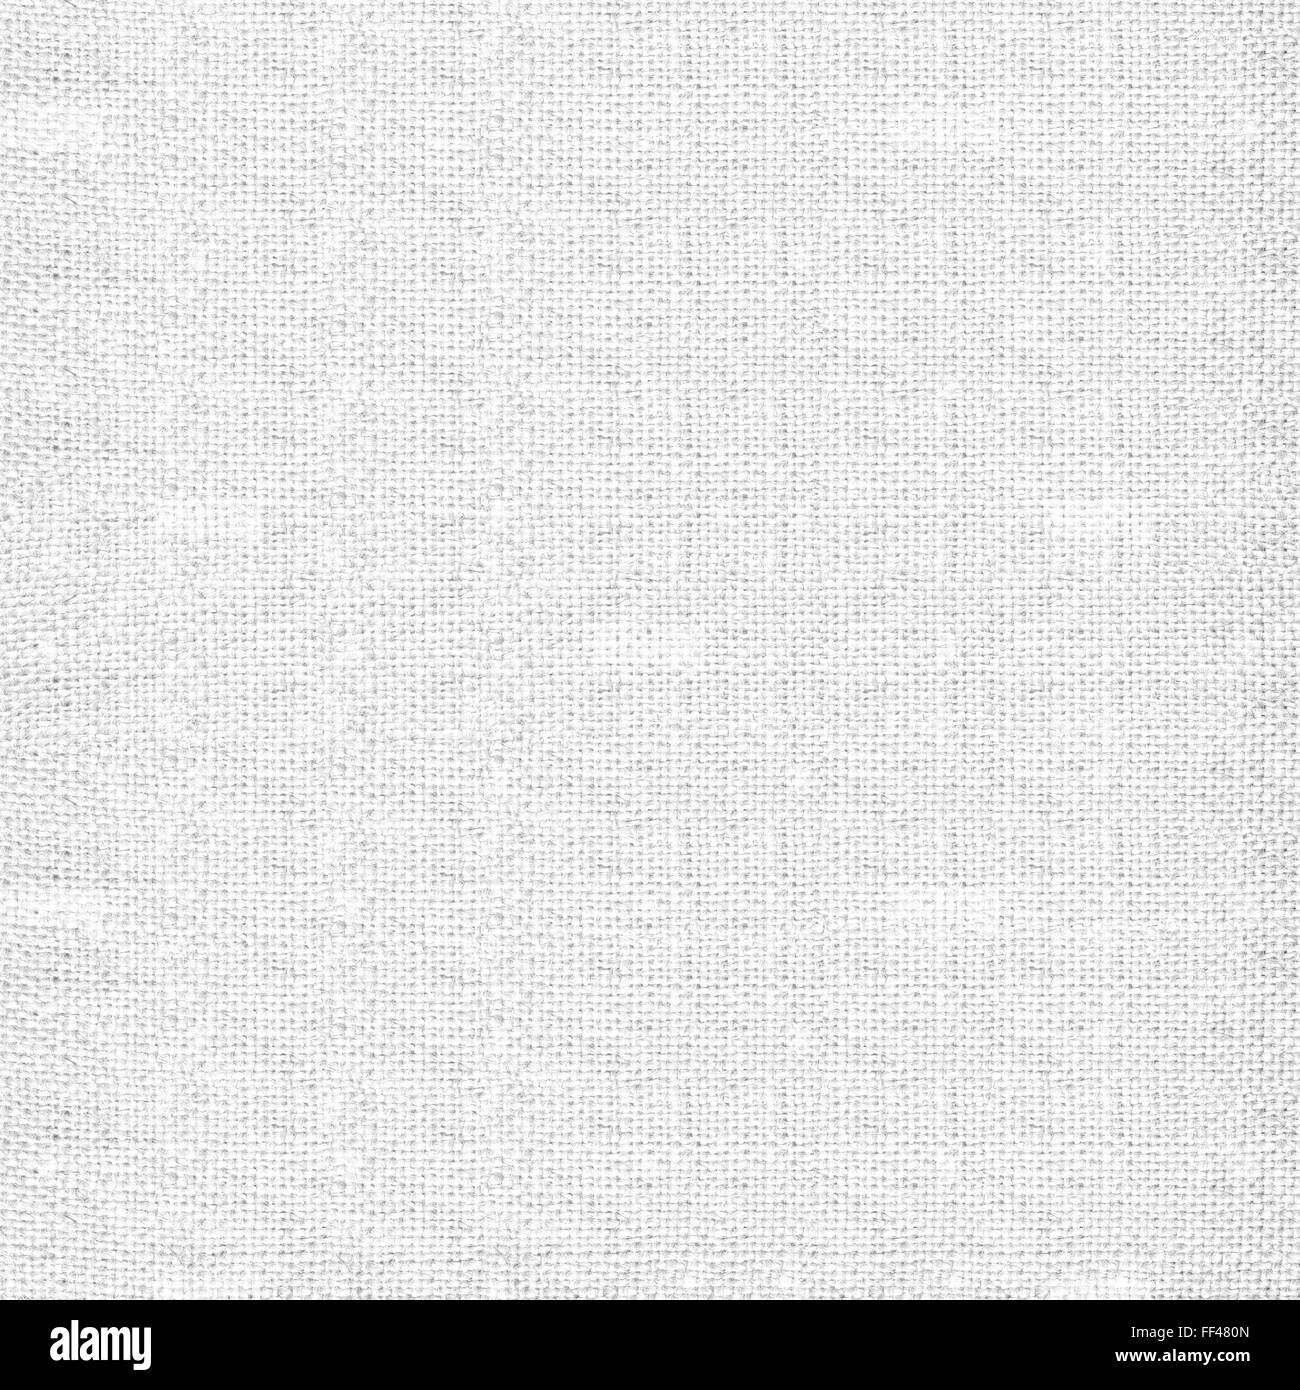 white linen texture or woven canvas background Stock Photo